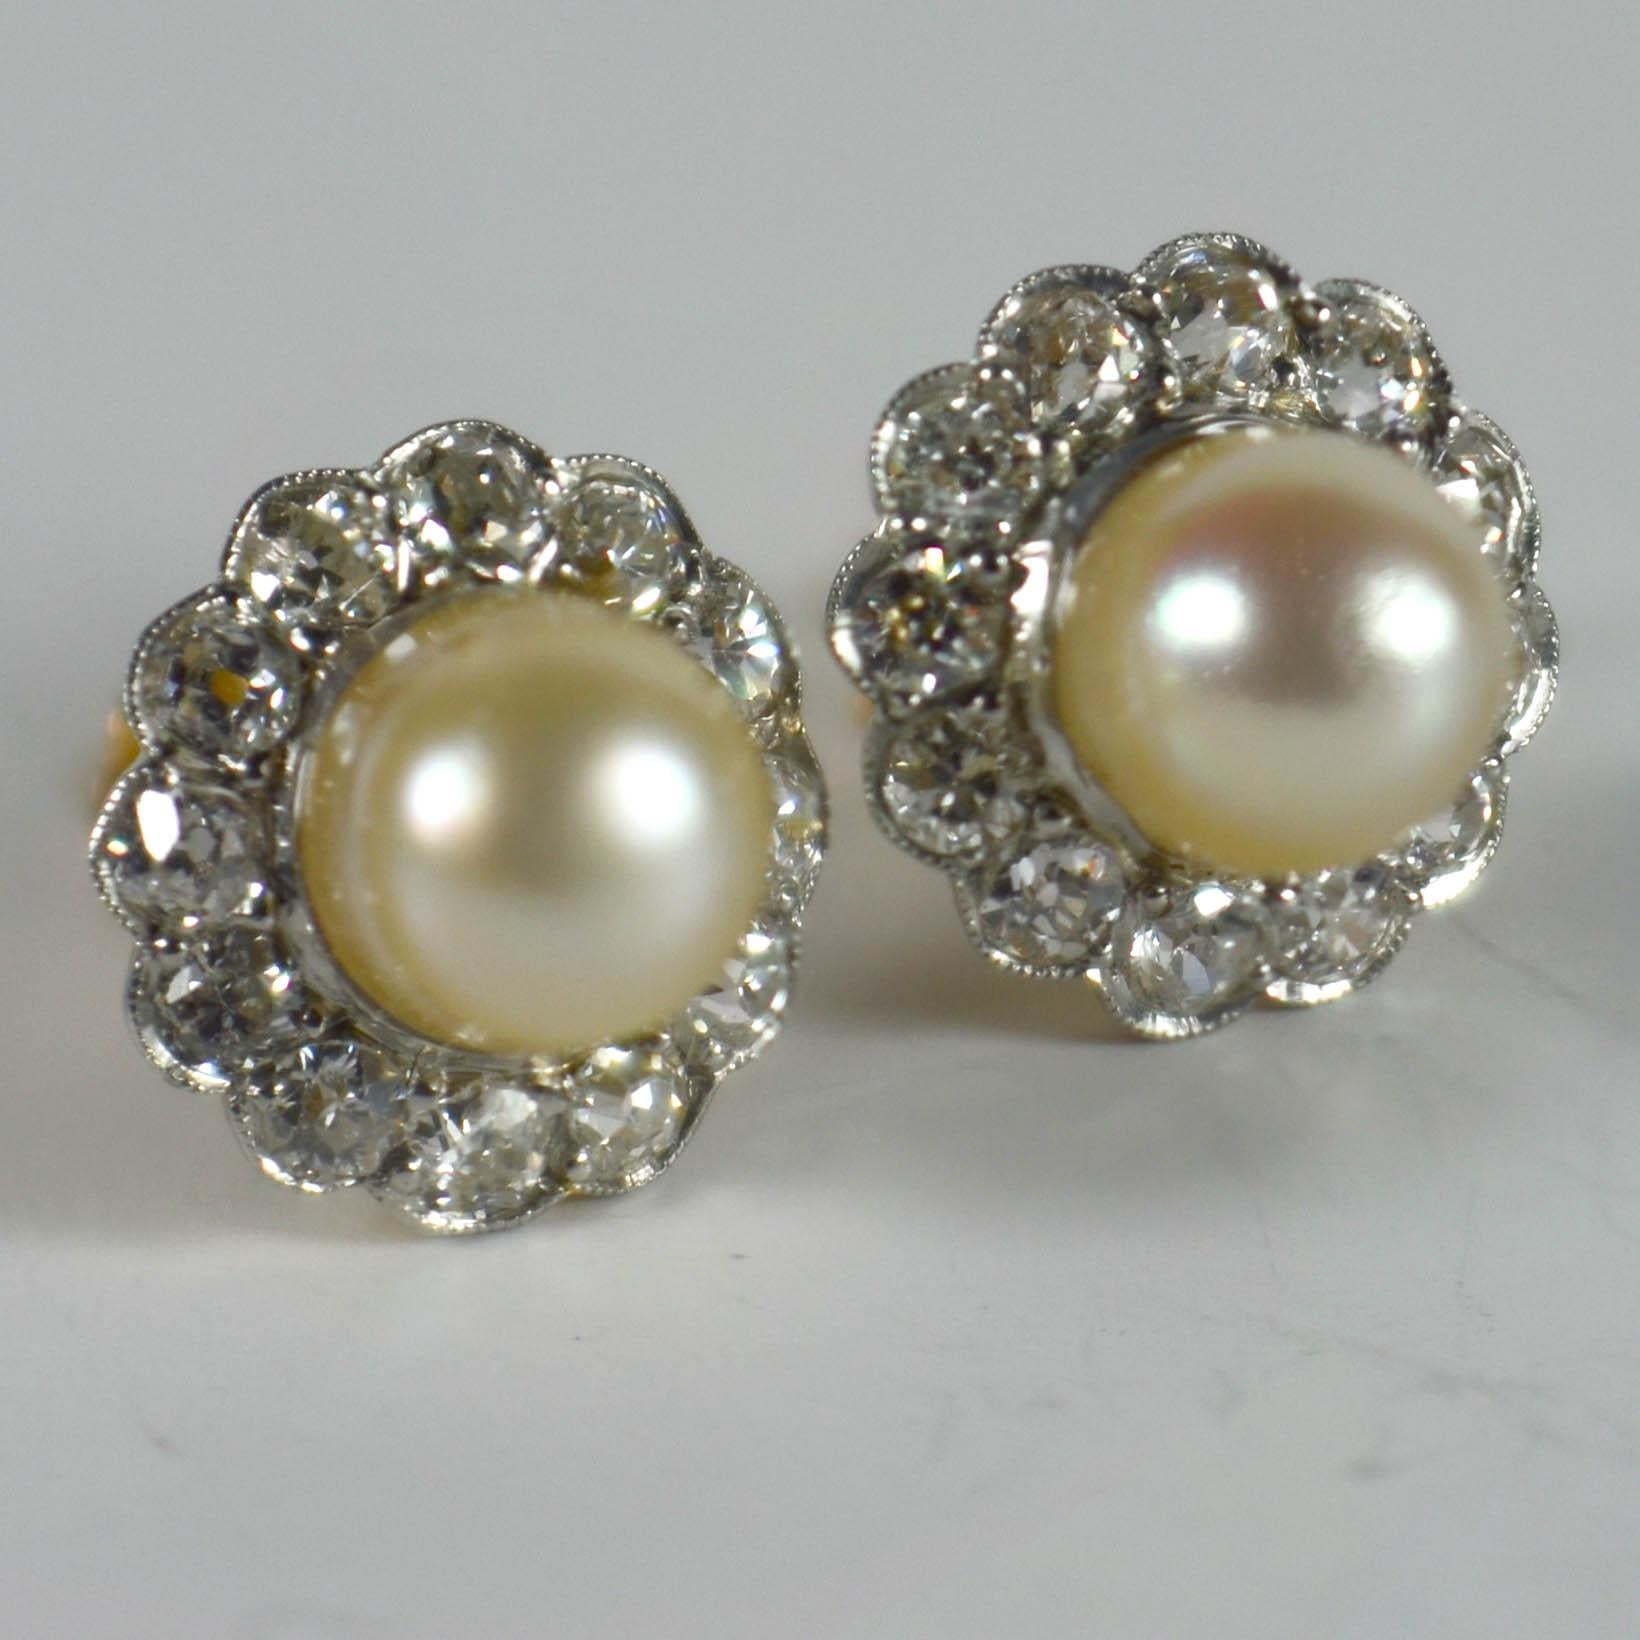 A pair of stud earrings in 18 karat gold and platinum designed as a cluster of white old transition cut diamonds surrounding a natural white pearl. The posts are set with a screw back fitting for added security when wearing these earrings.

Each